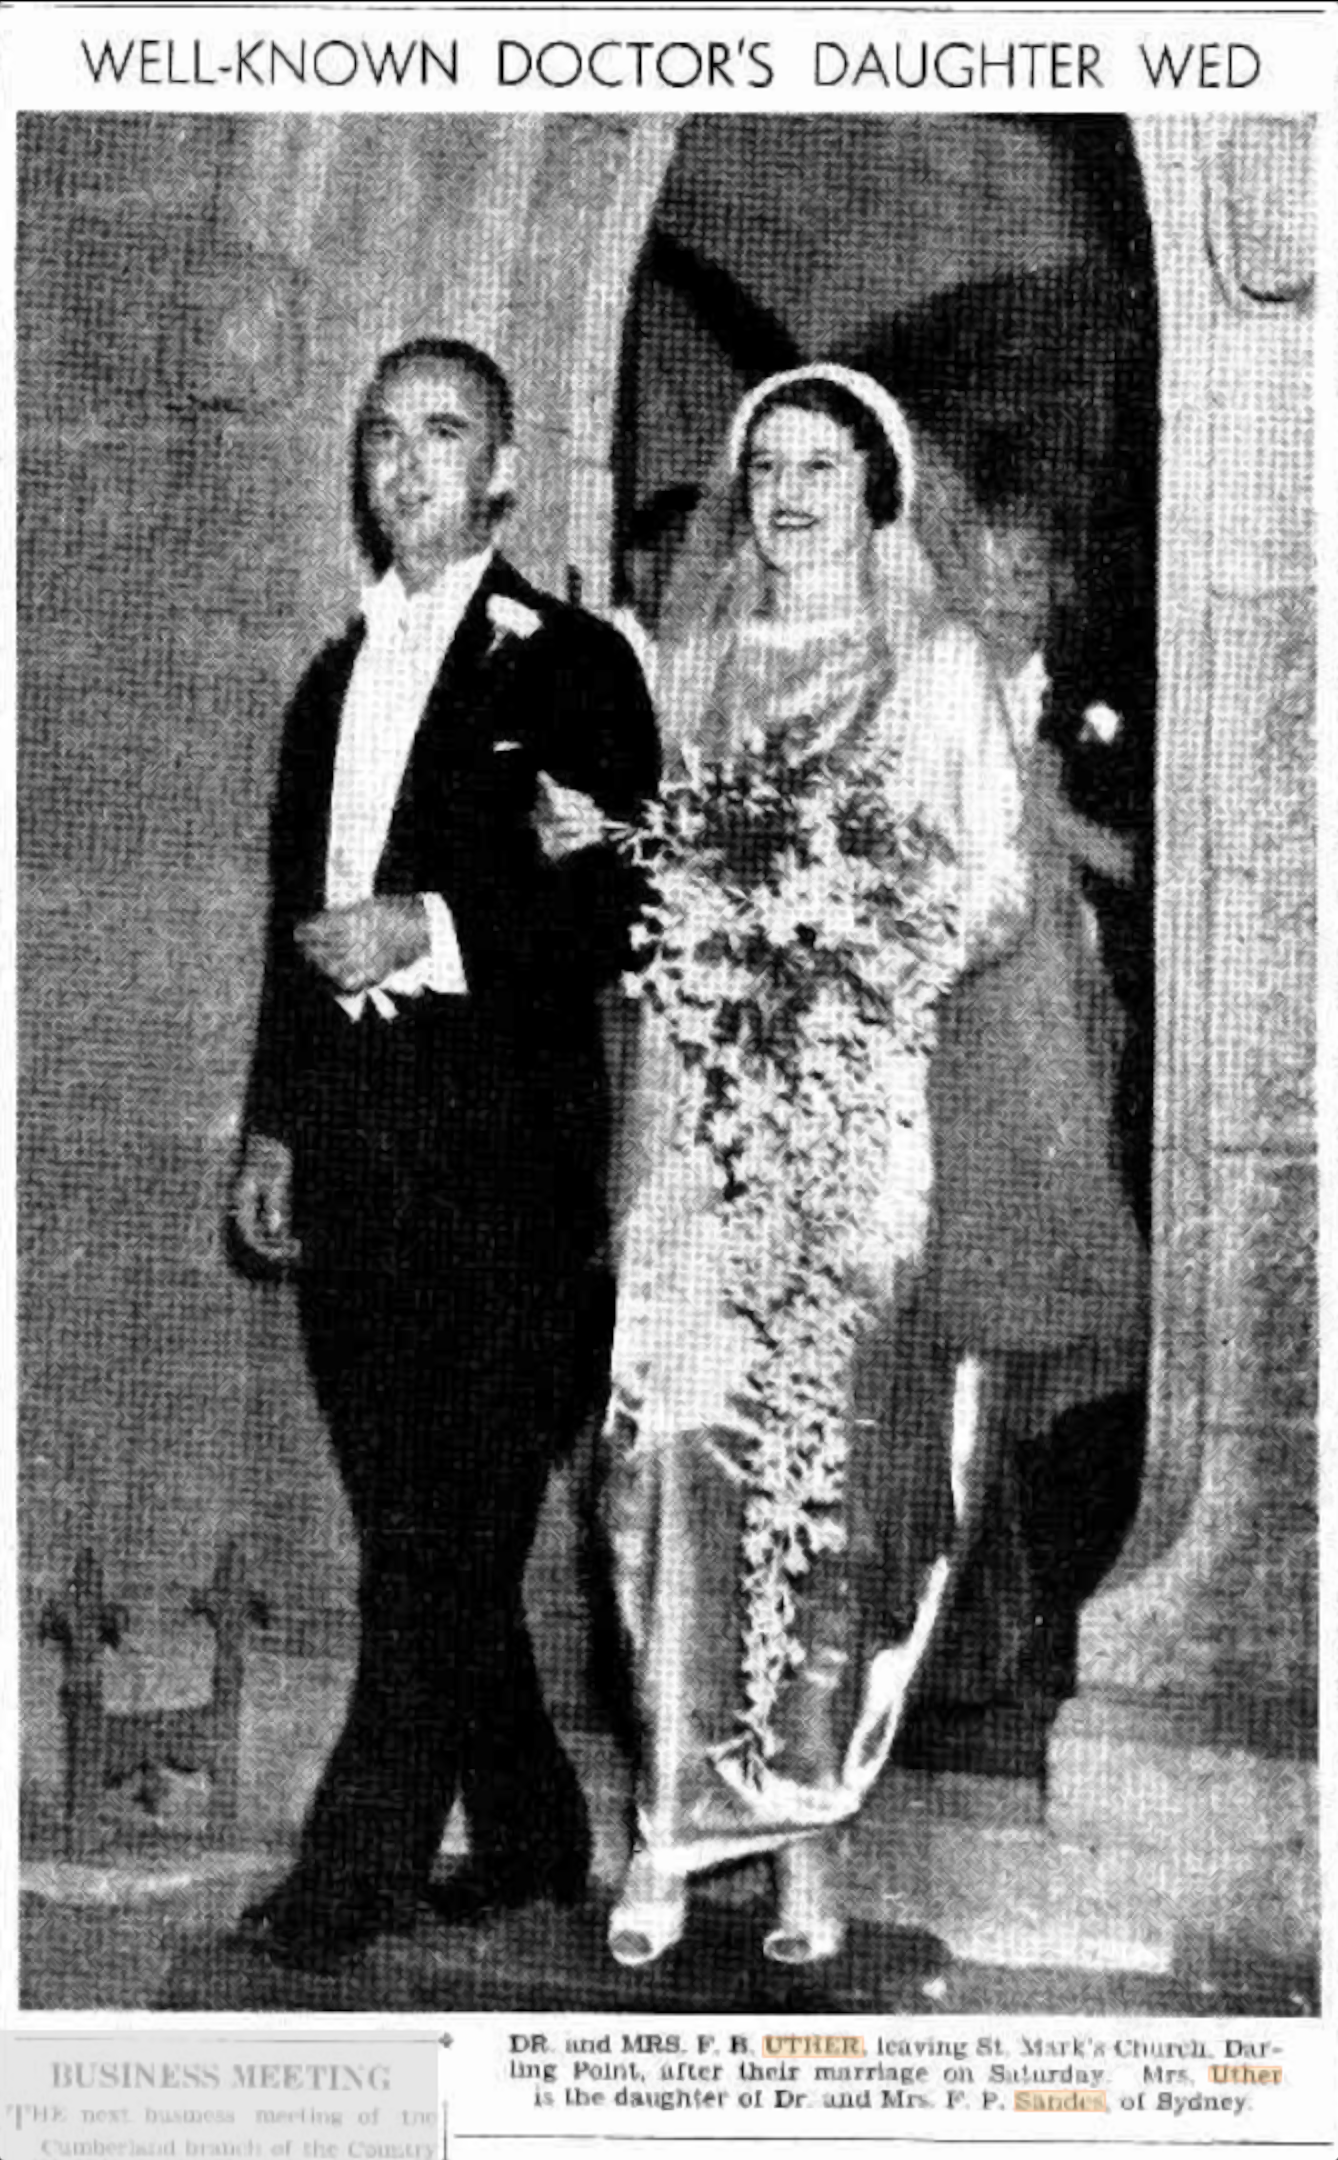 Dr Frederick B Uther and Mrs Jean F Sandes outside St Mark's Church Sydney on their wedding day.